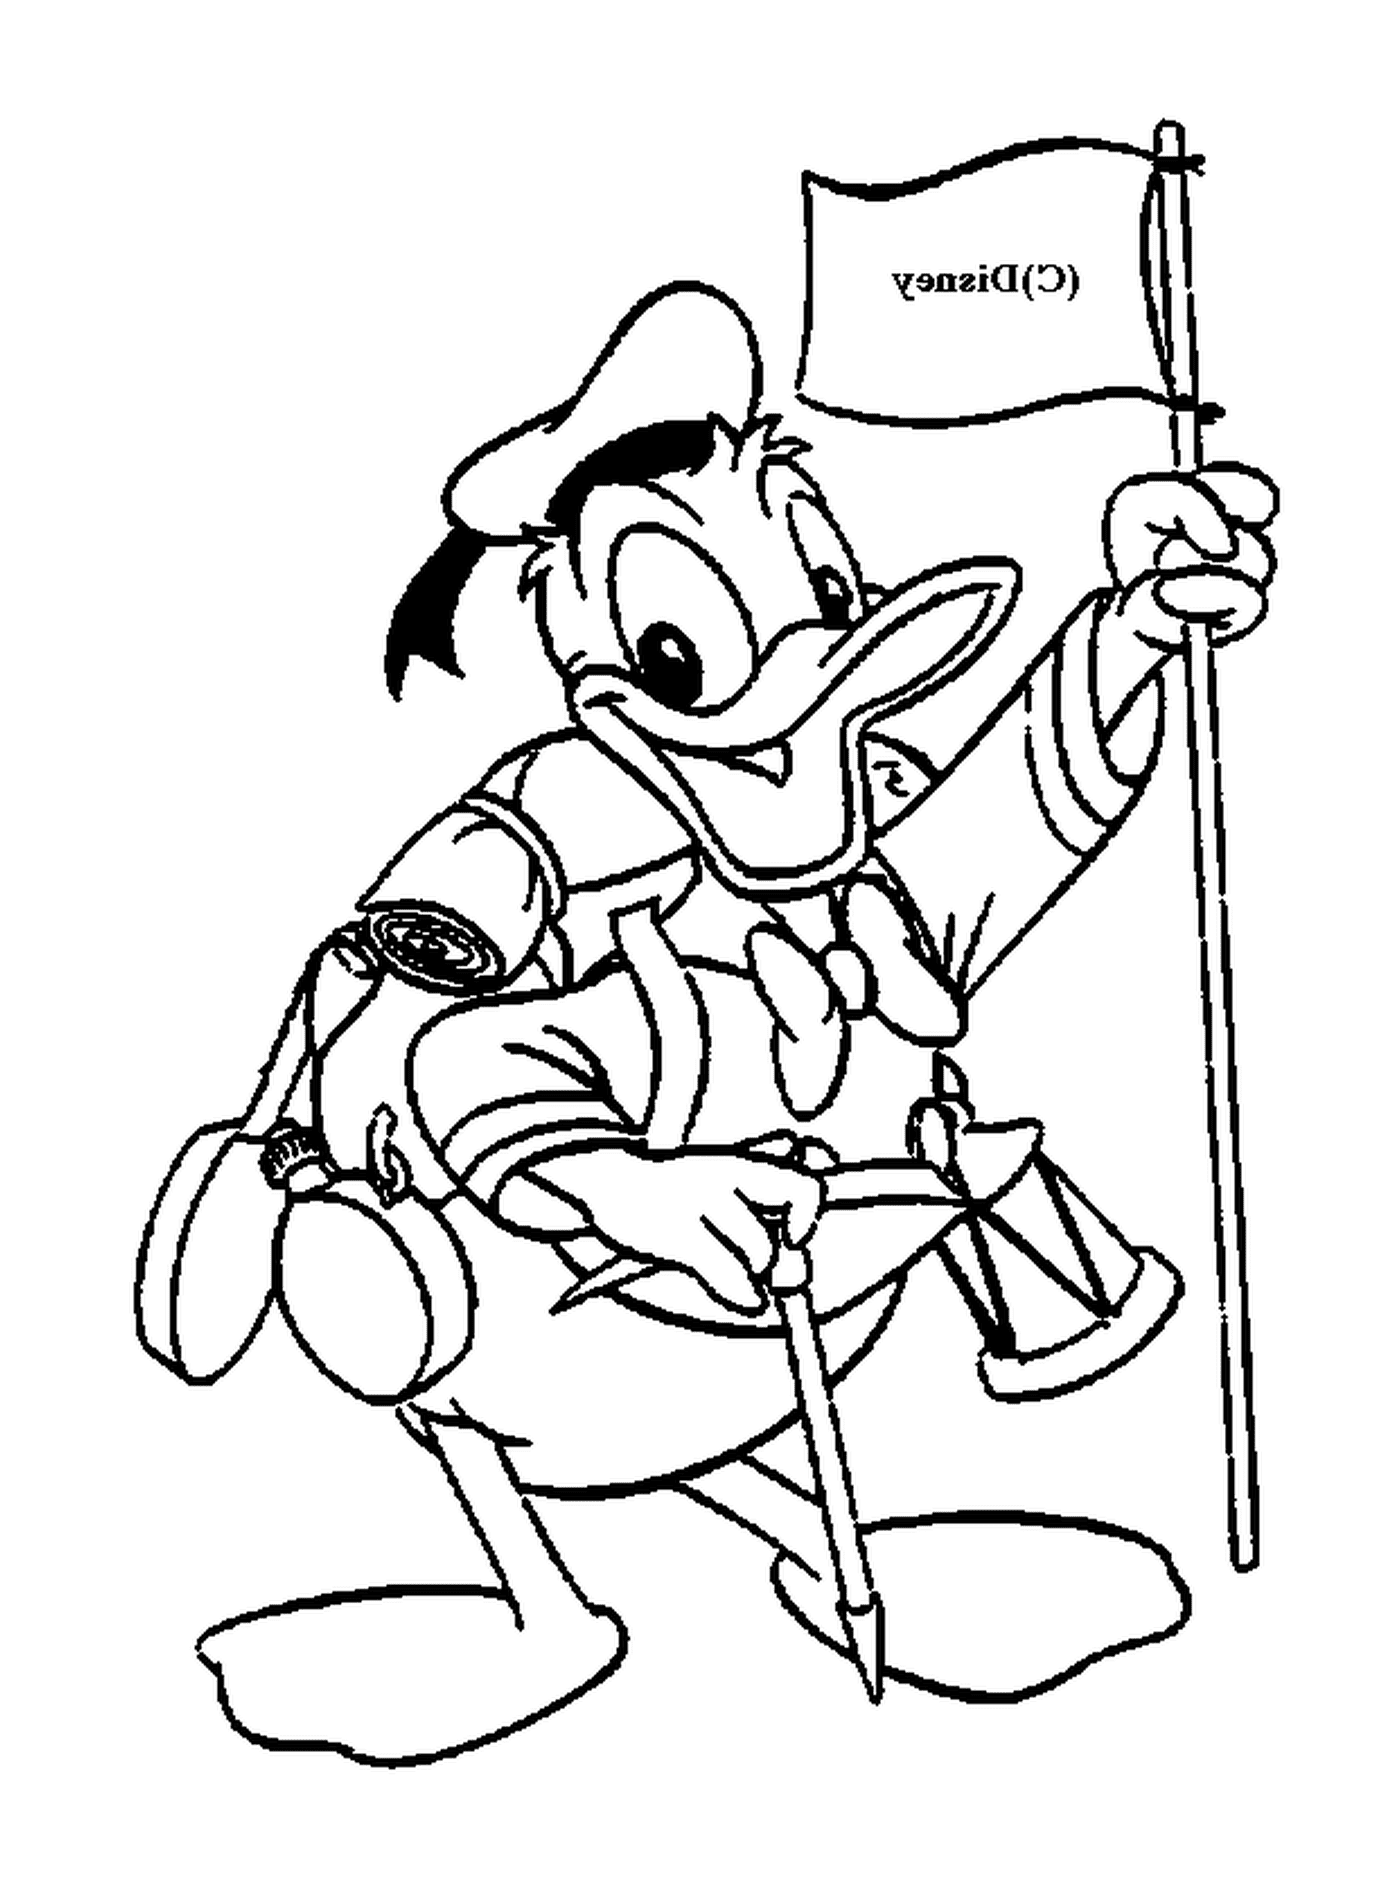  Donald in scout outfit, proud of his flag 